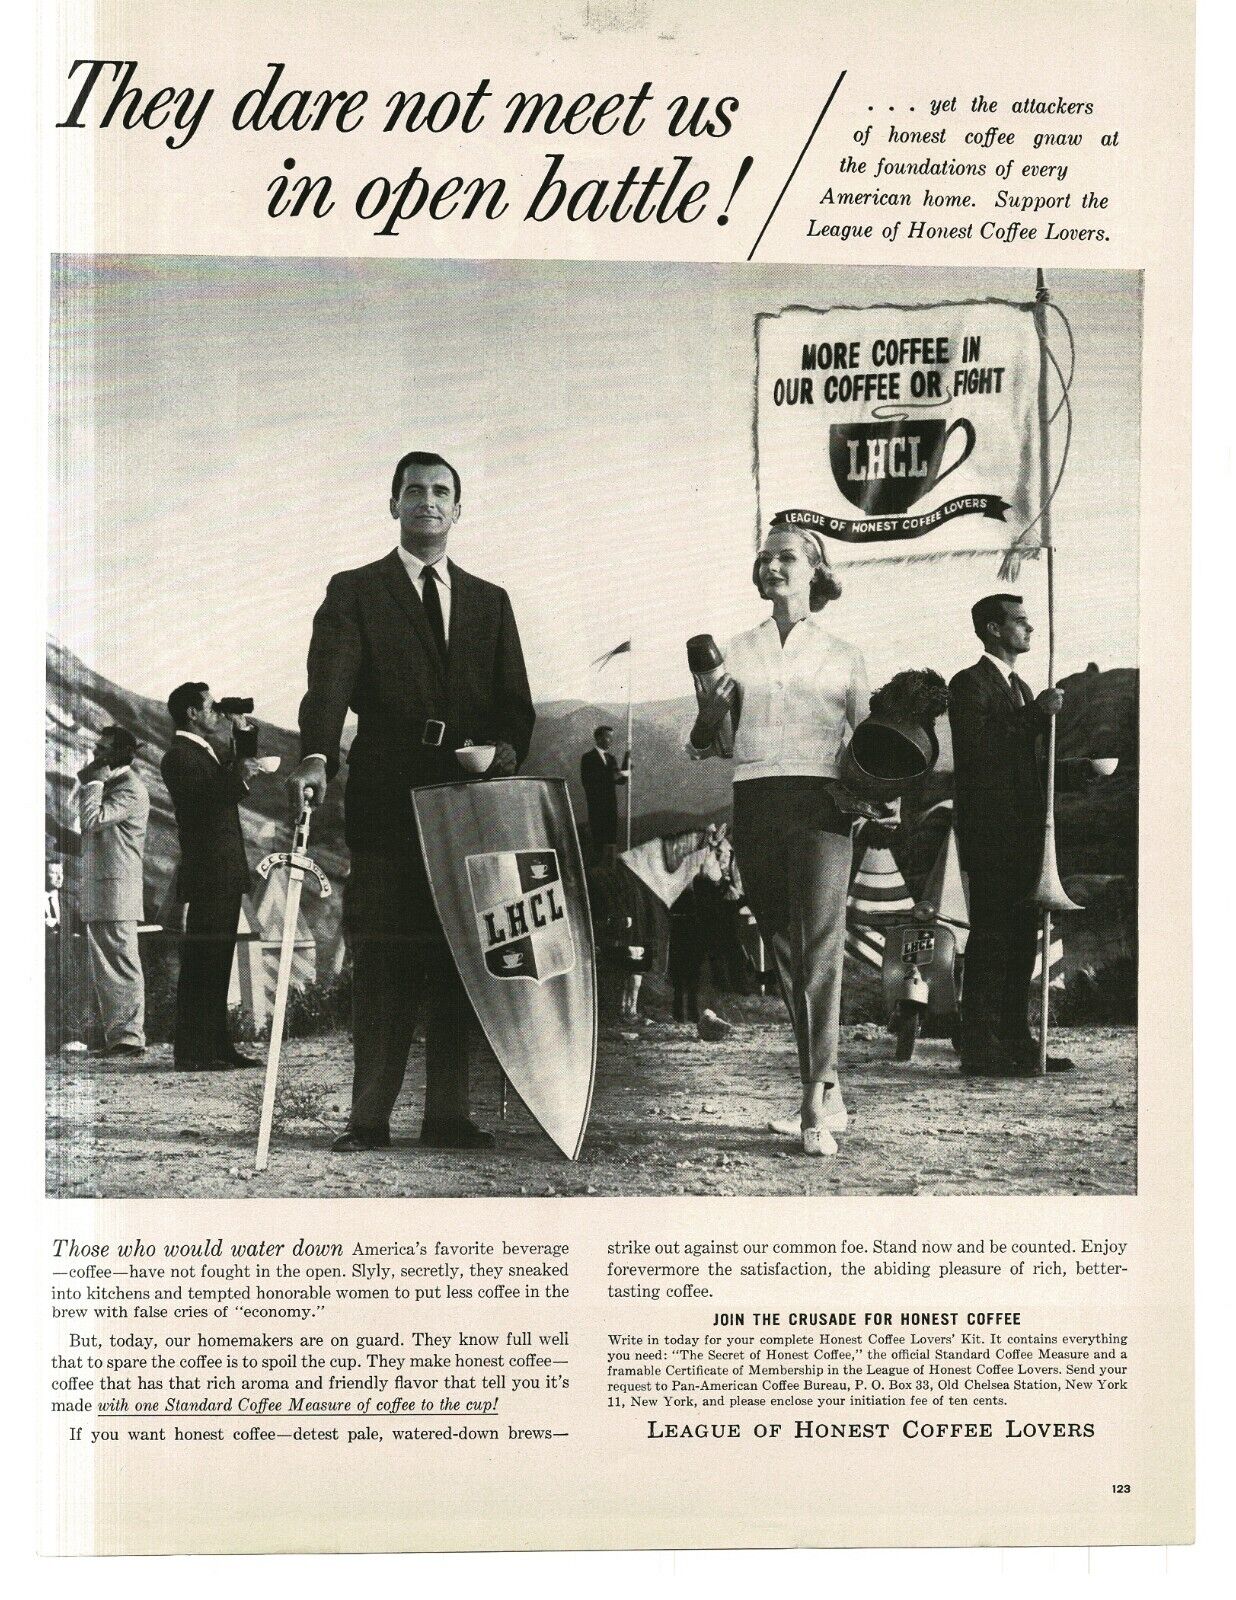 1959 League Of Honest Coffee Lovers man with sword and shield Vintage Print Ad